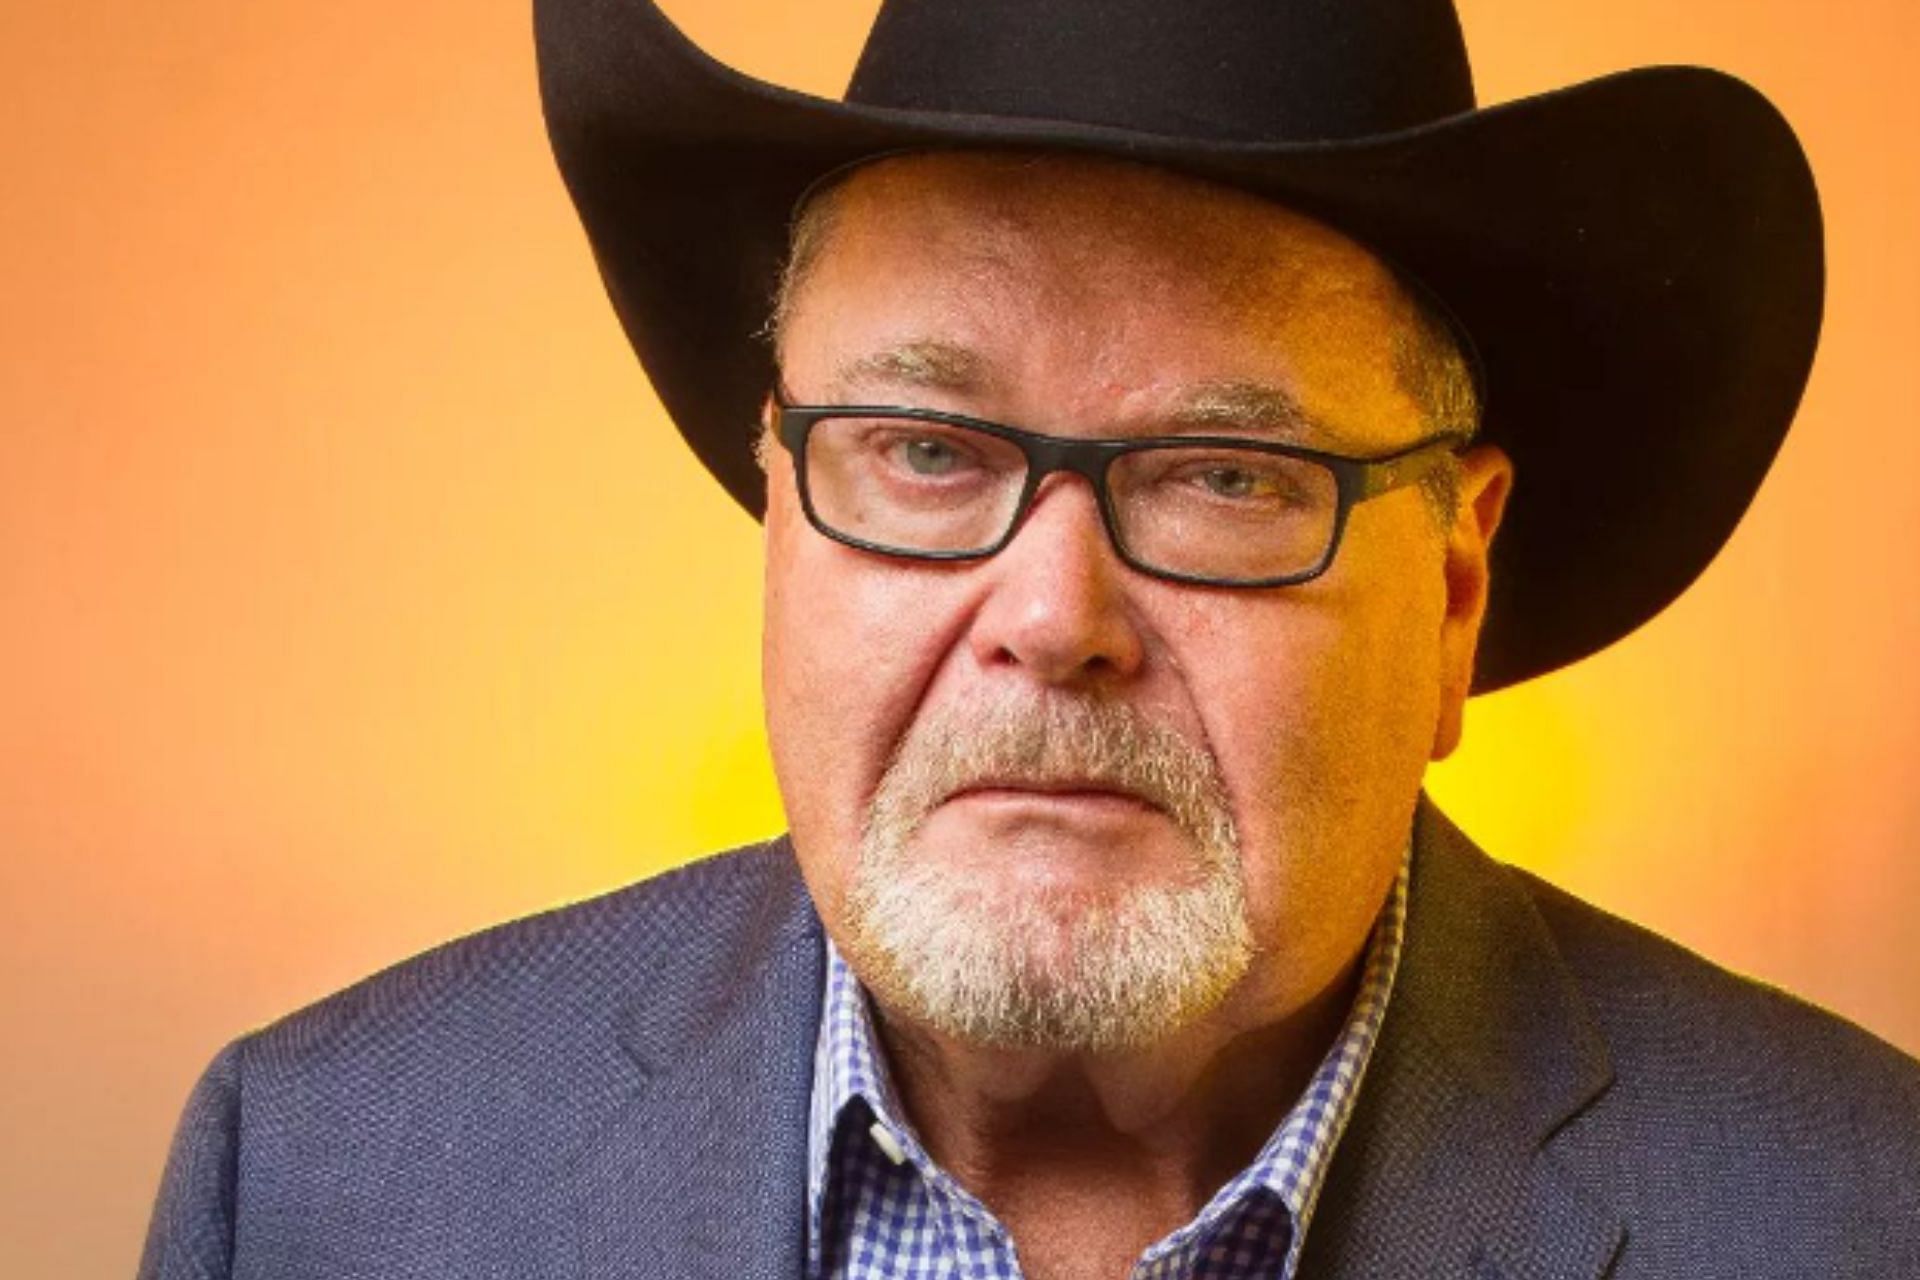 Jim Ross talks about a possible match callling scenario [Image Credits: Jim Ross Instagram]